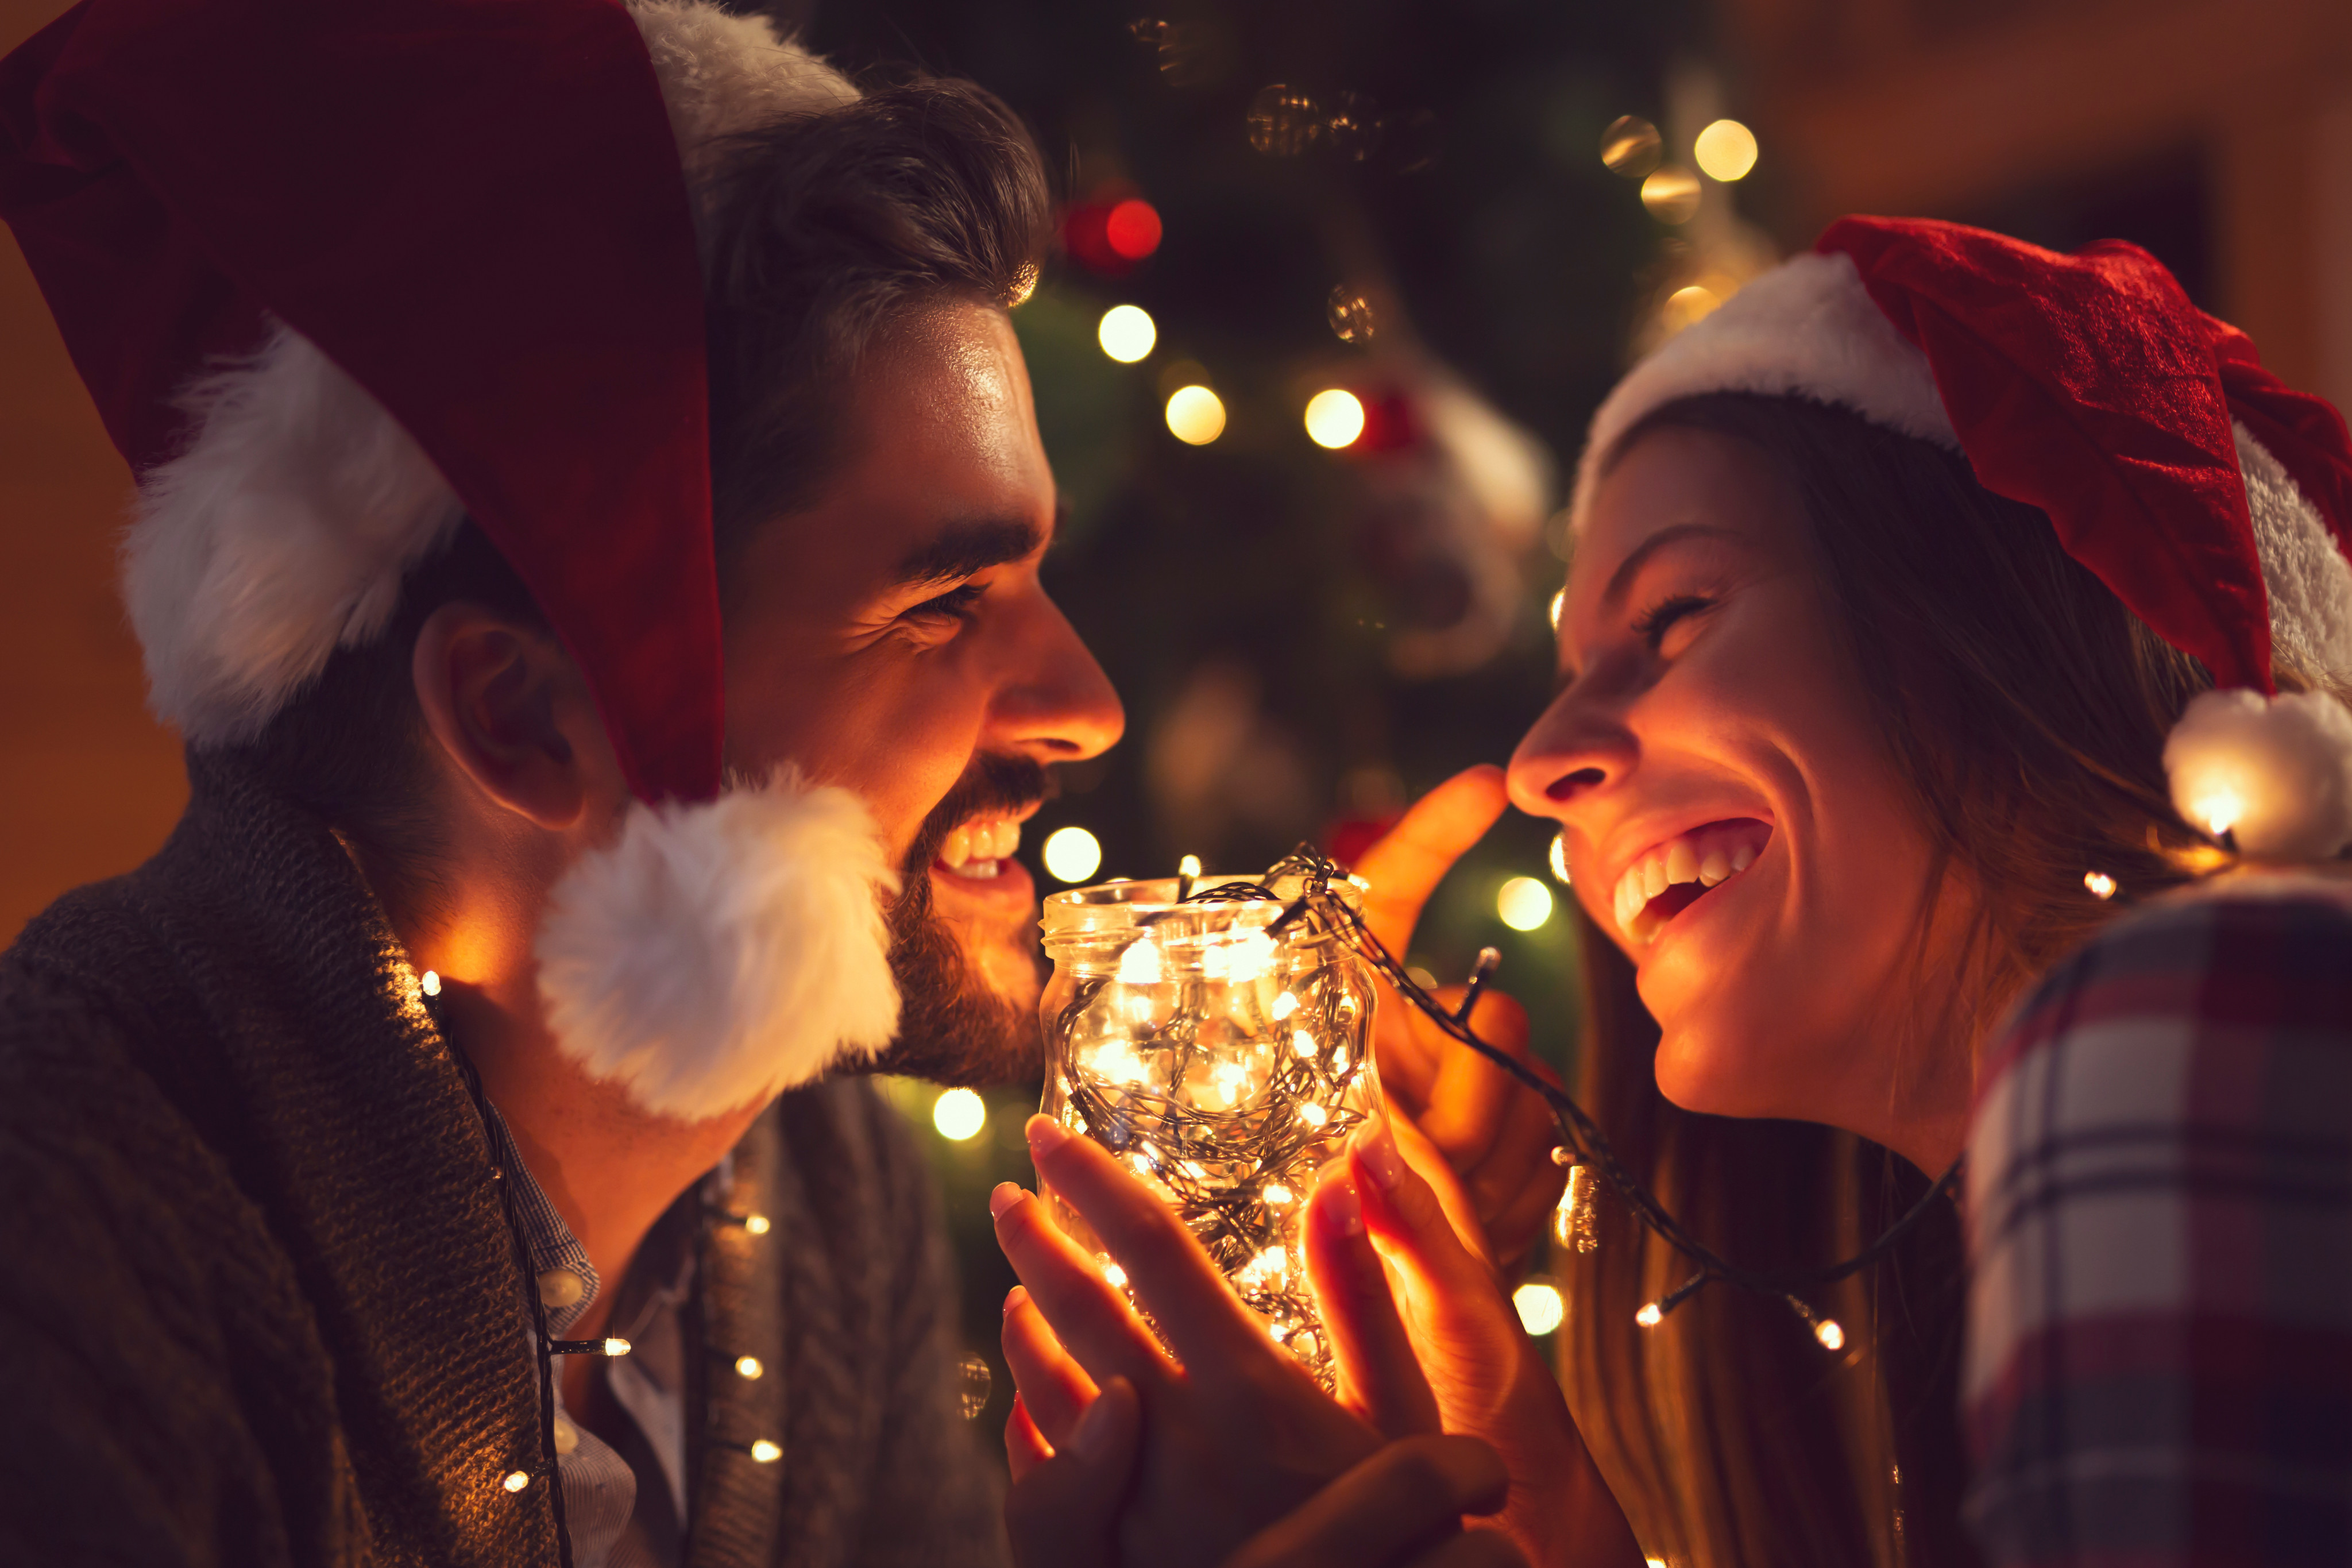 Beware the toxic ex who comes calling to have a date for the holiday season but may easily discard you again. Experts explain how to avoid potential heartbreak. Photo: Shutterstock